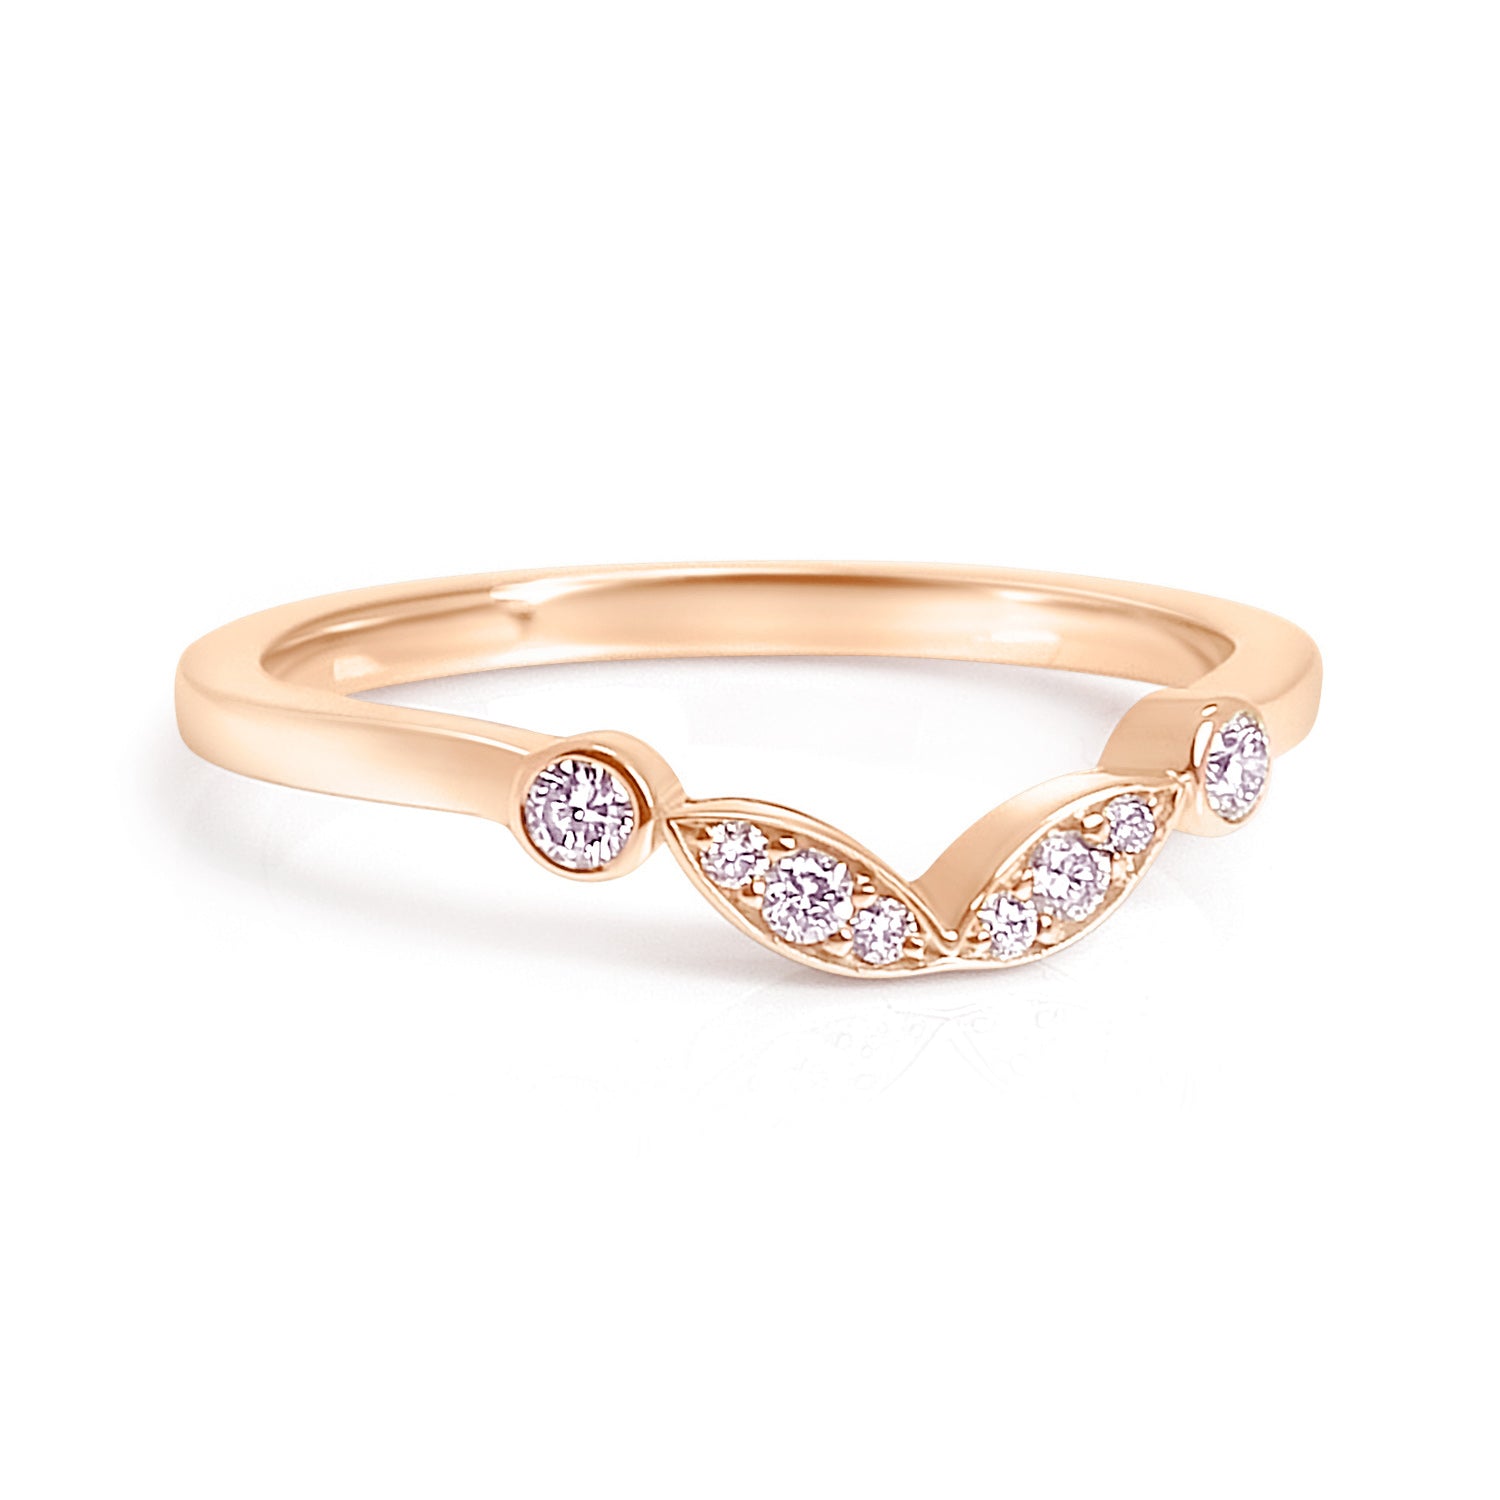 Bespoke Claire engagement ring - Fairtrade rose gold, conflict-free diamonds and unique tailored shape